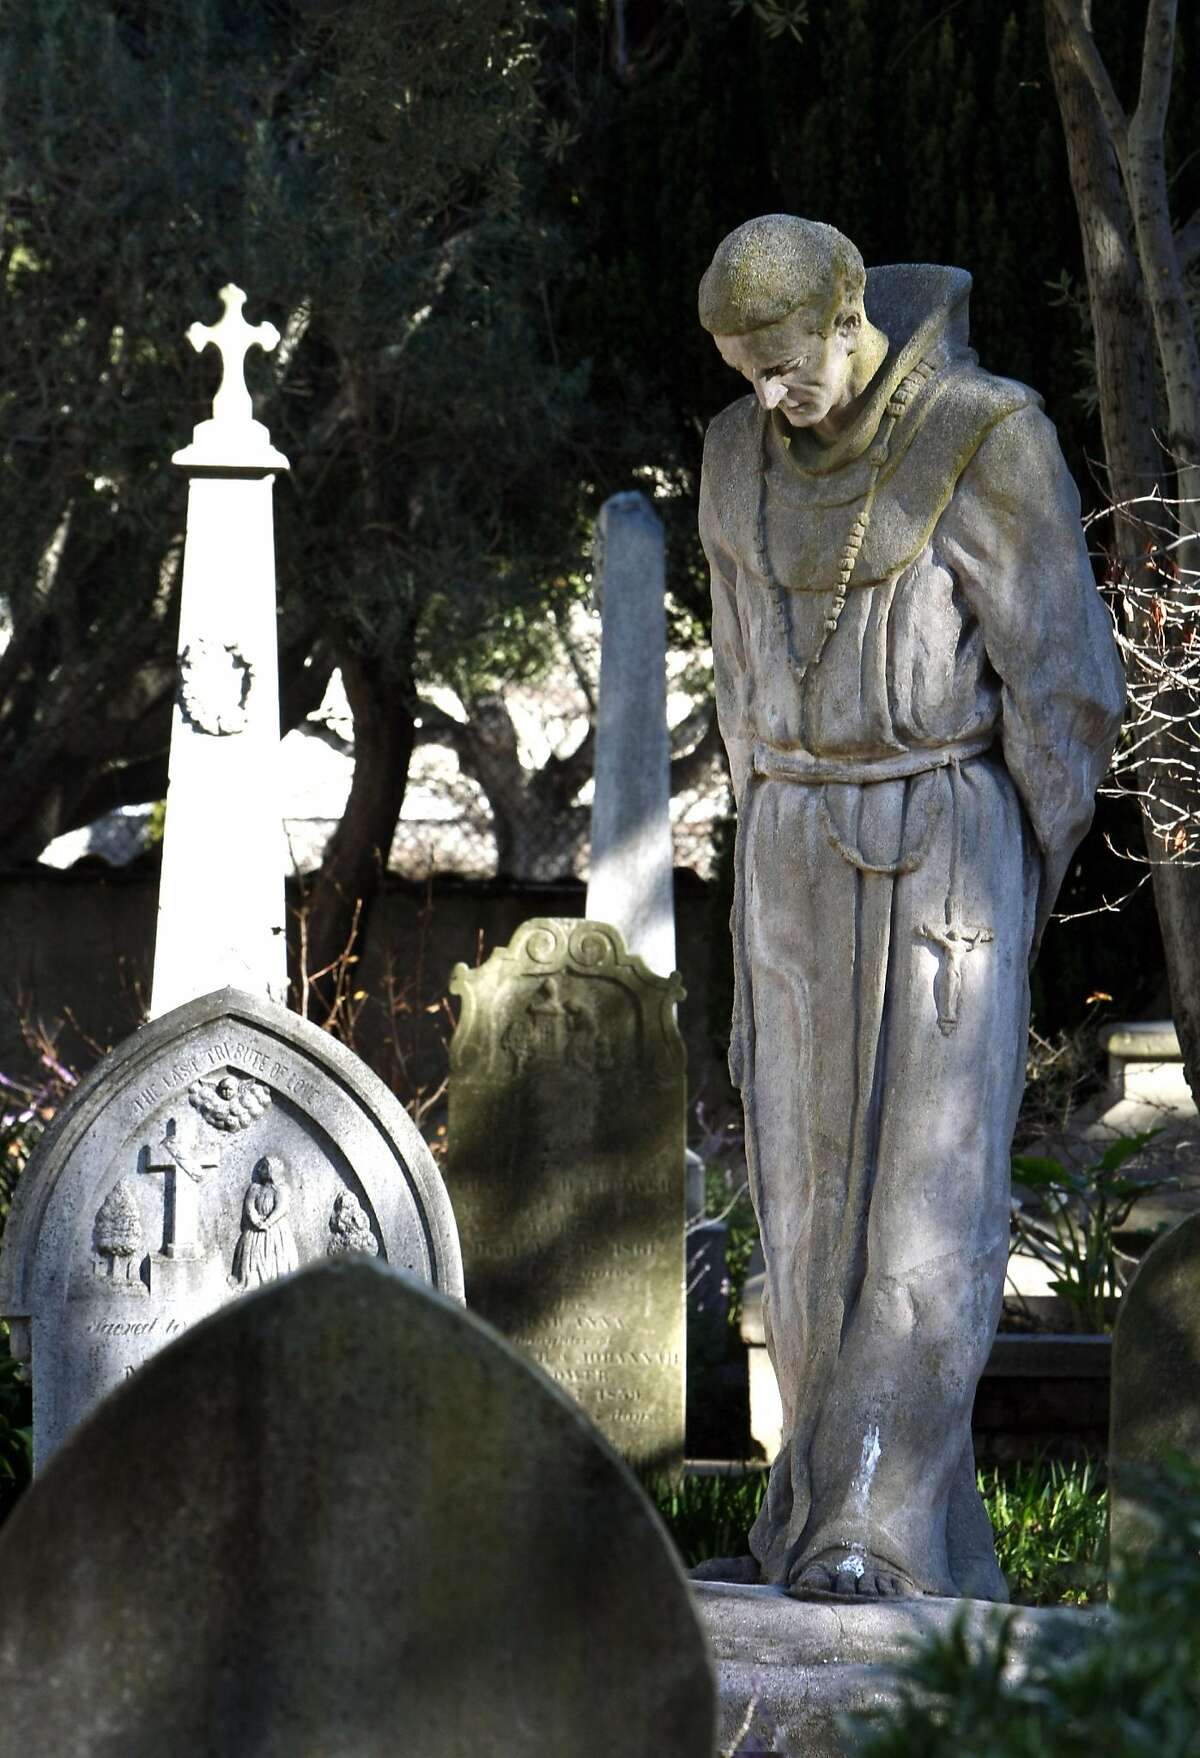 A Statue of Father Junipero Serra stands in the middle of the church cemetery at Mission Dolores in San Francisco on Tuesday, Jan 13, 2009.